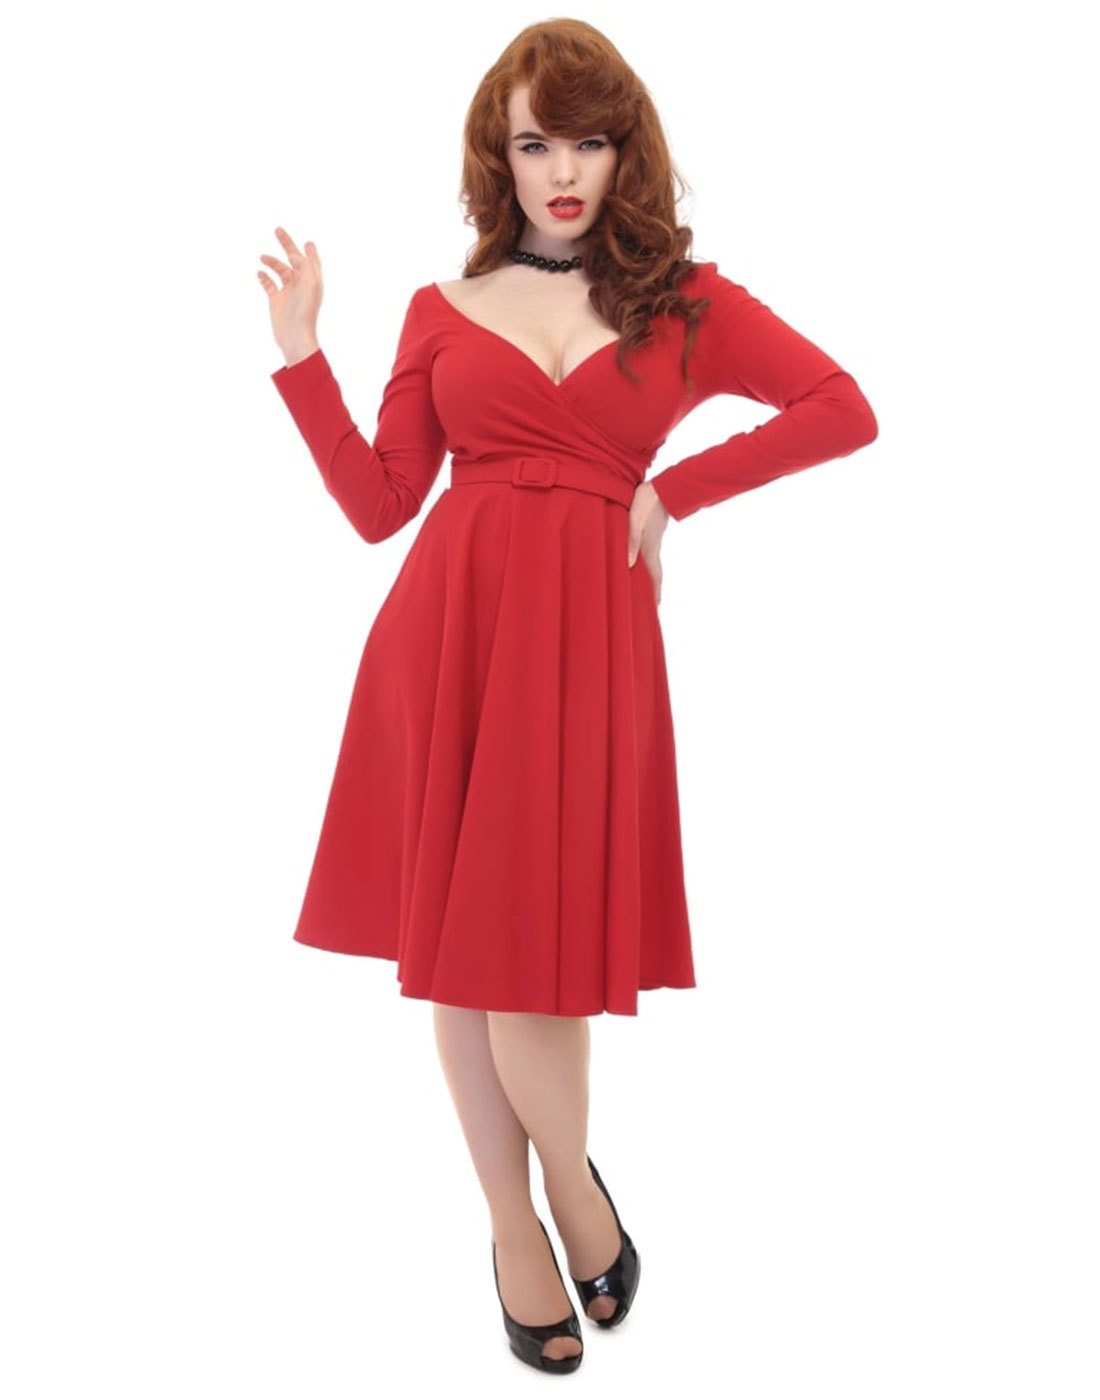 Nicky COLLECTIF Vintage 1950s Party Doll Dress RED